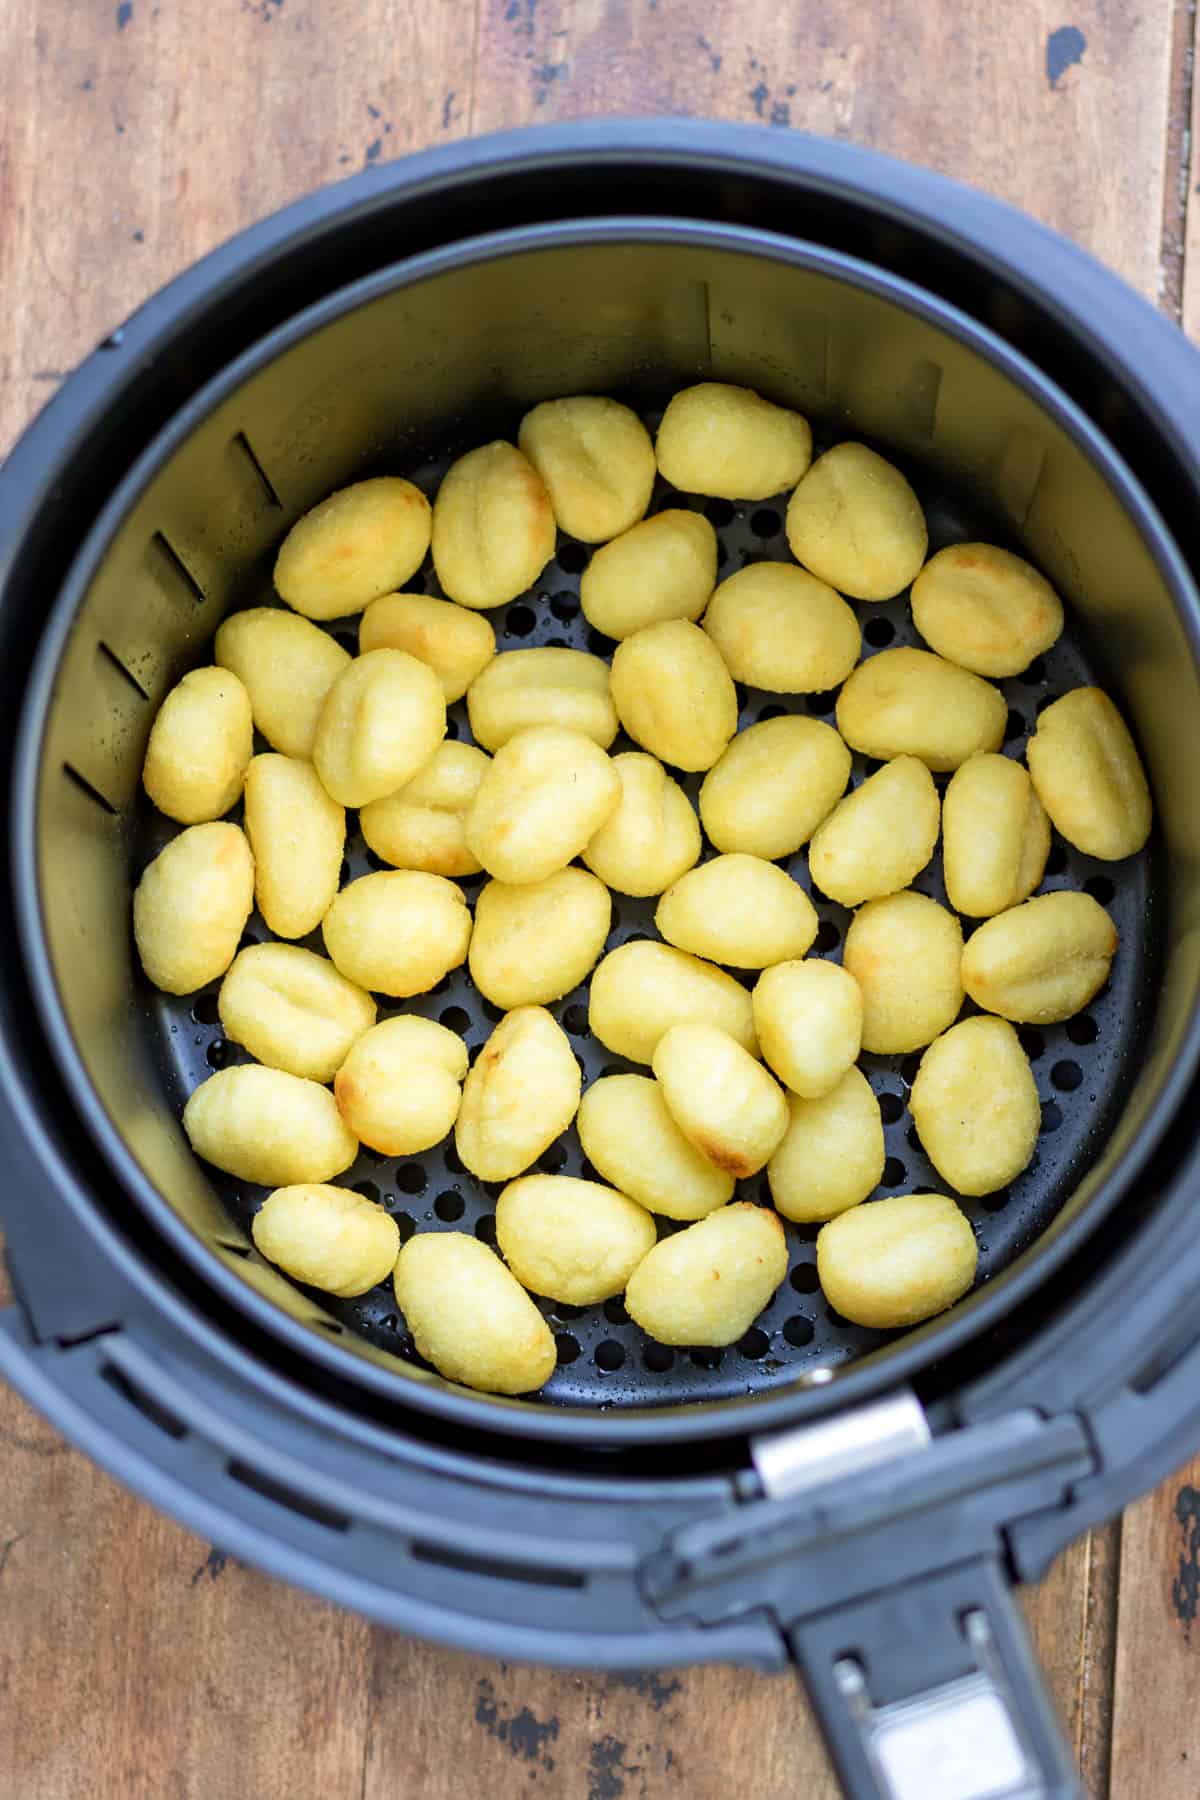 Cooking gnocchi in an air fryer.